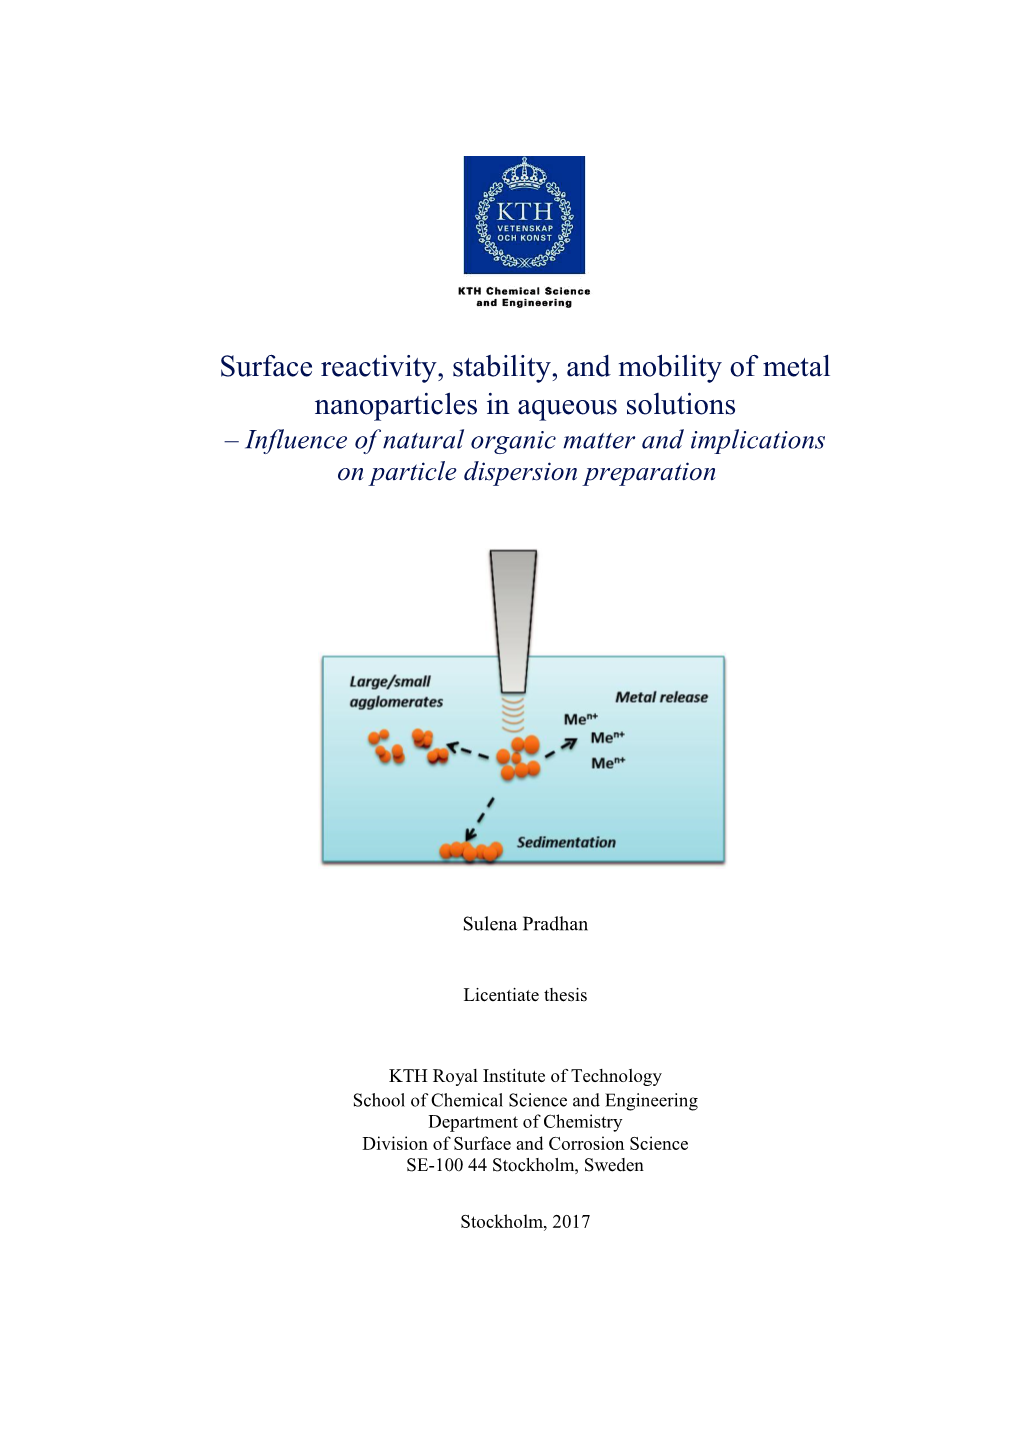 Surface Reactivity, Stability, and Mobility of Metal Nanoparticles in Aqueous Solutions